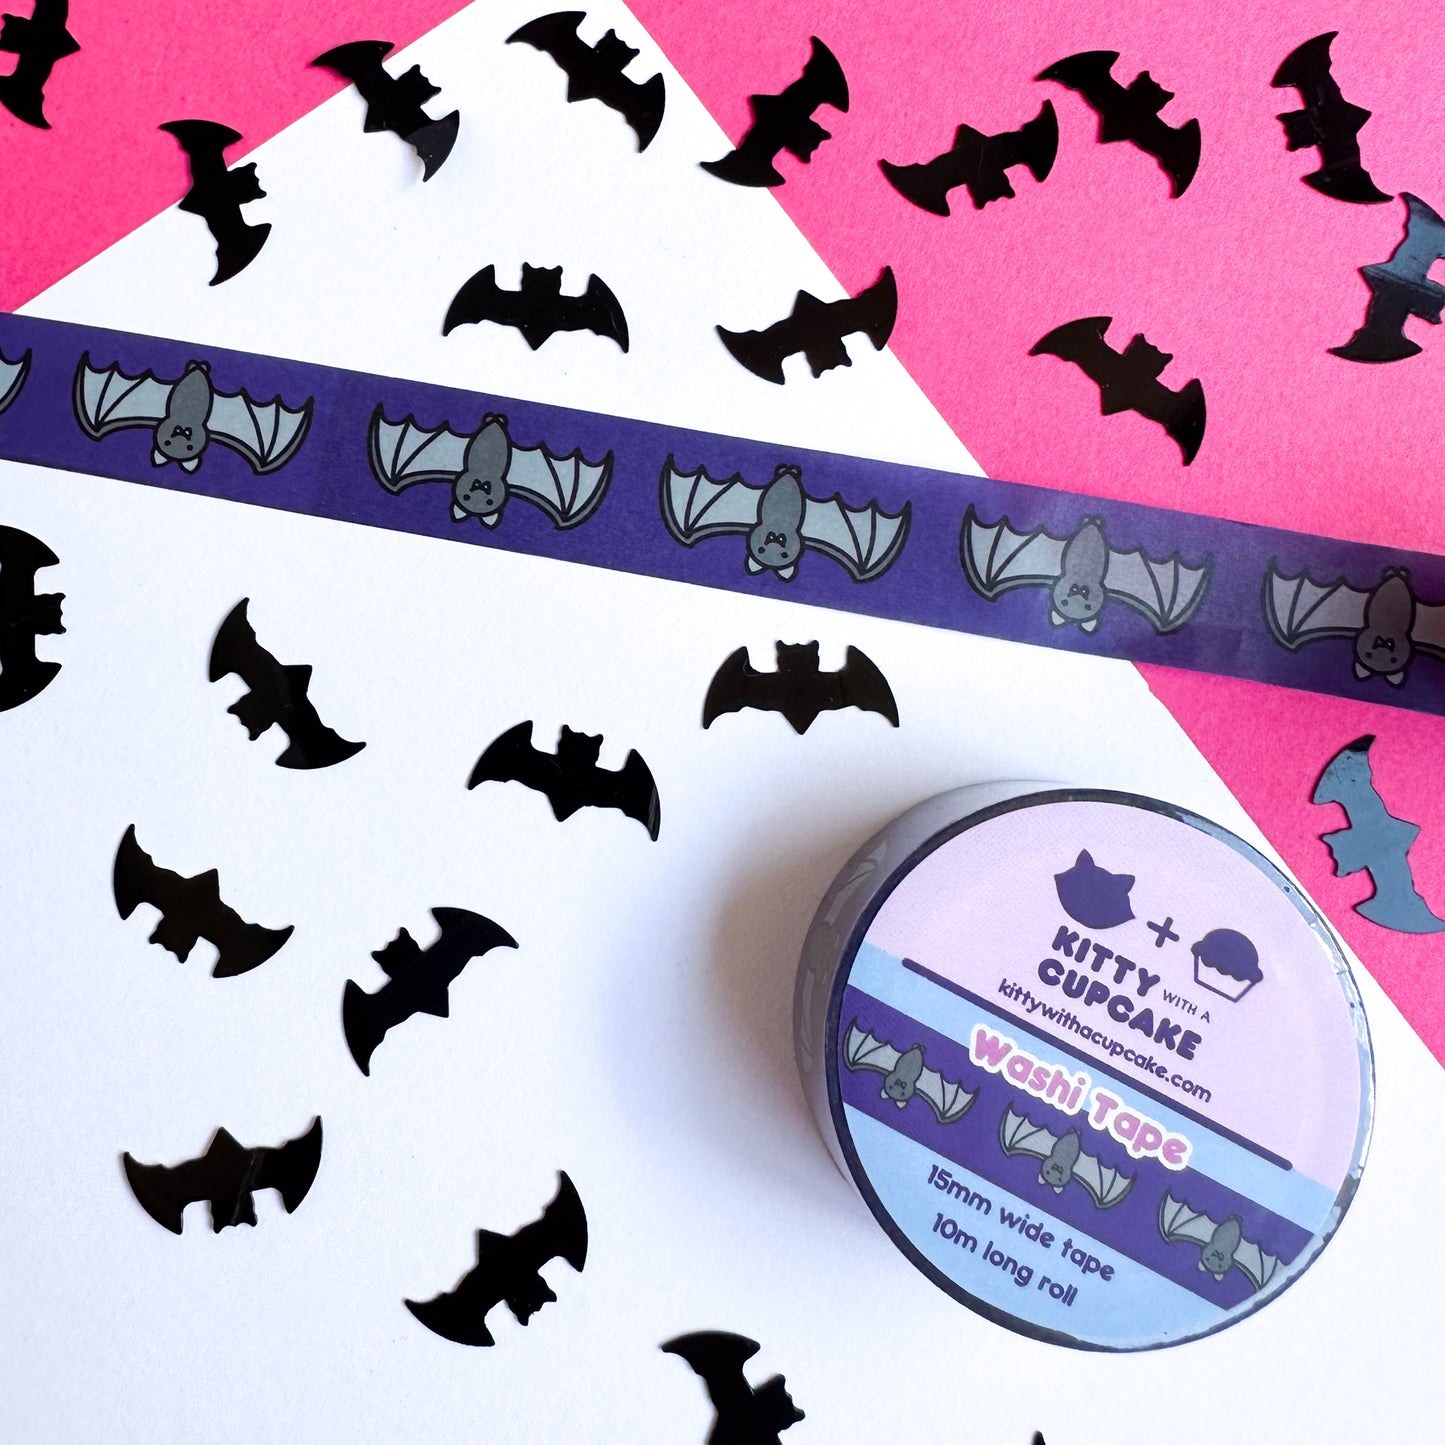 A piece of washi tape stuck to a white piece of paper on a hot pink piece of paper. The tape is dark purple with illustrations of cute bats on it. There is black bat confetti strewn around the tape. A full roll of packaged washi tape is below. 